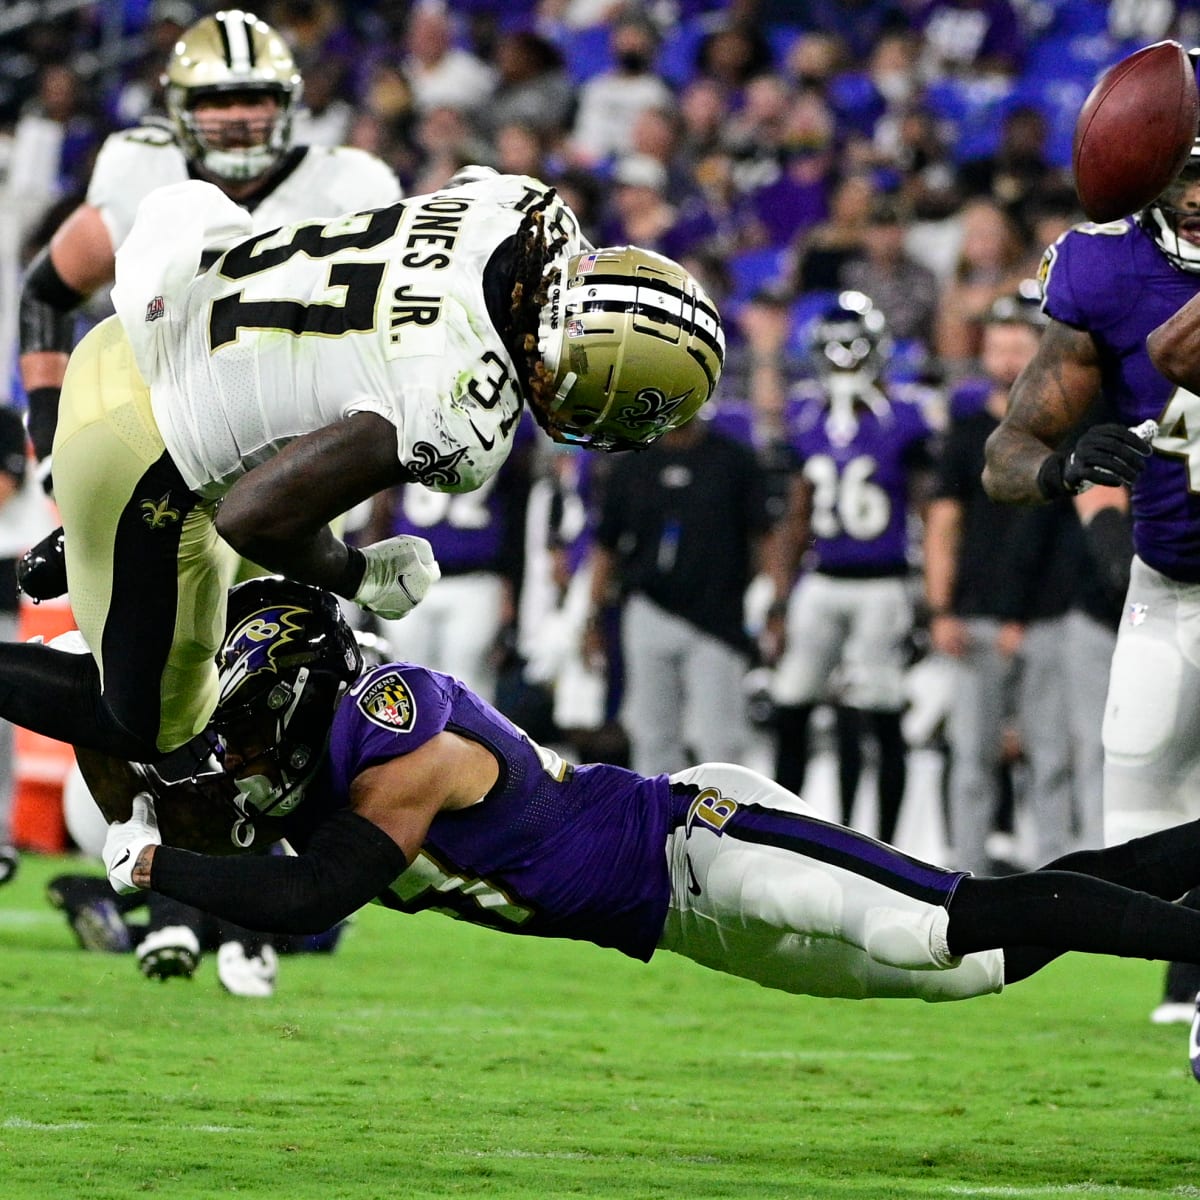 How to Watch the Baltimore Ravens vs. New Orleans Saints - NFL Week 9